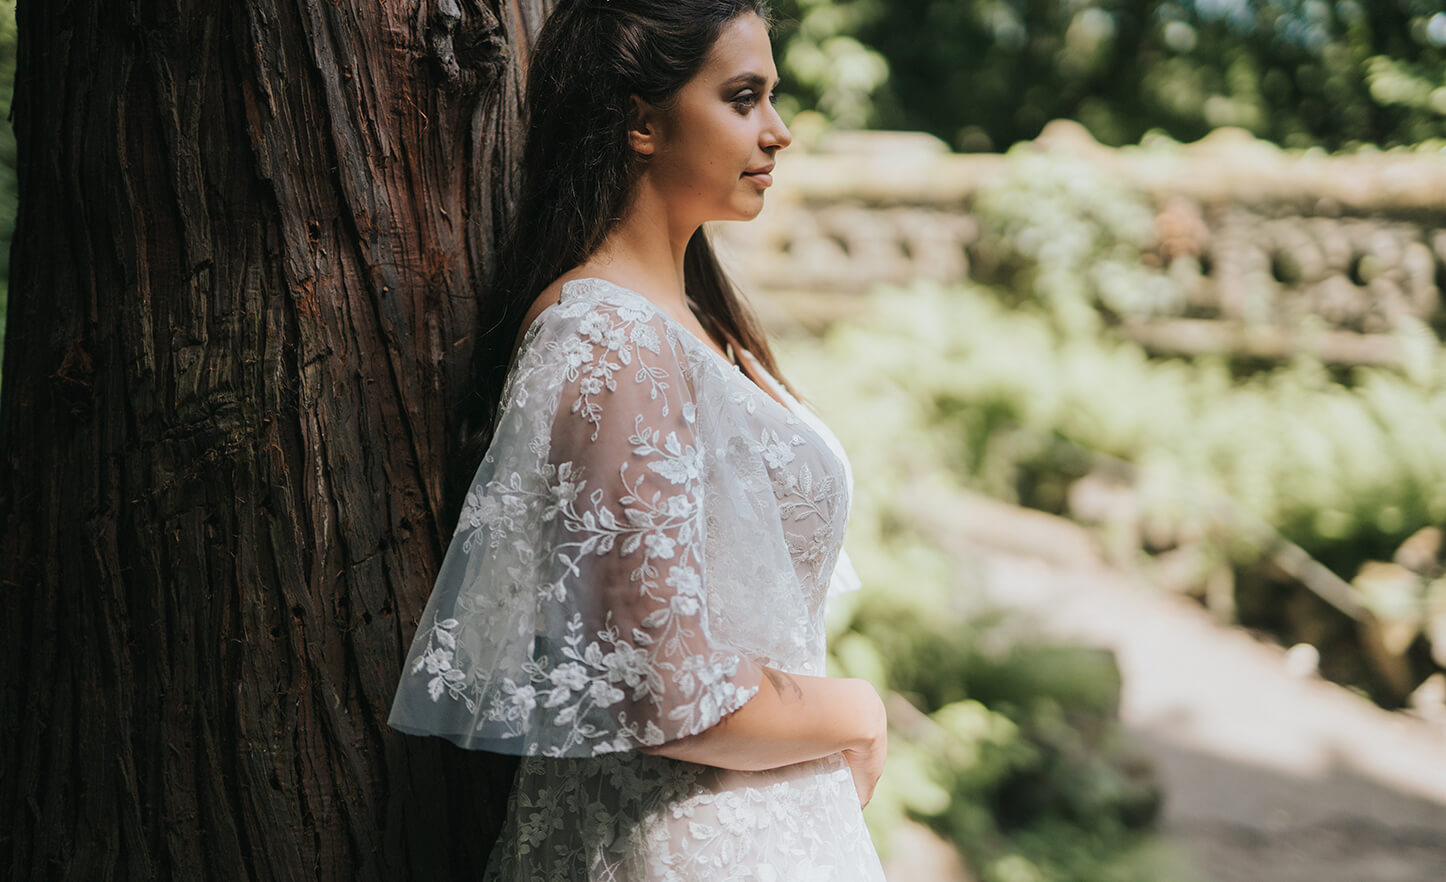 12 Tricks That Will Save You Hundreds on a Wedding Dress